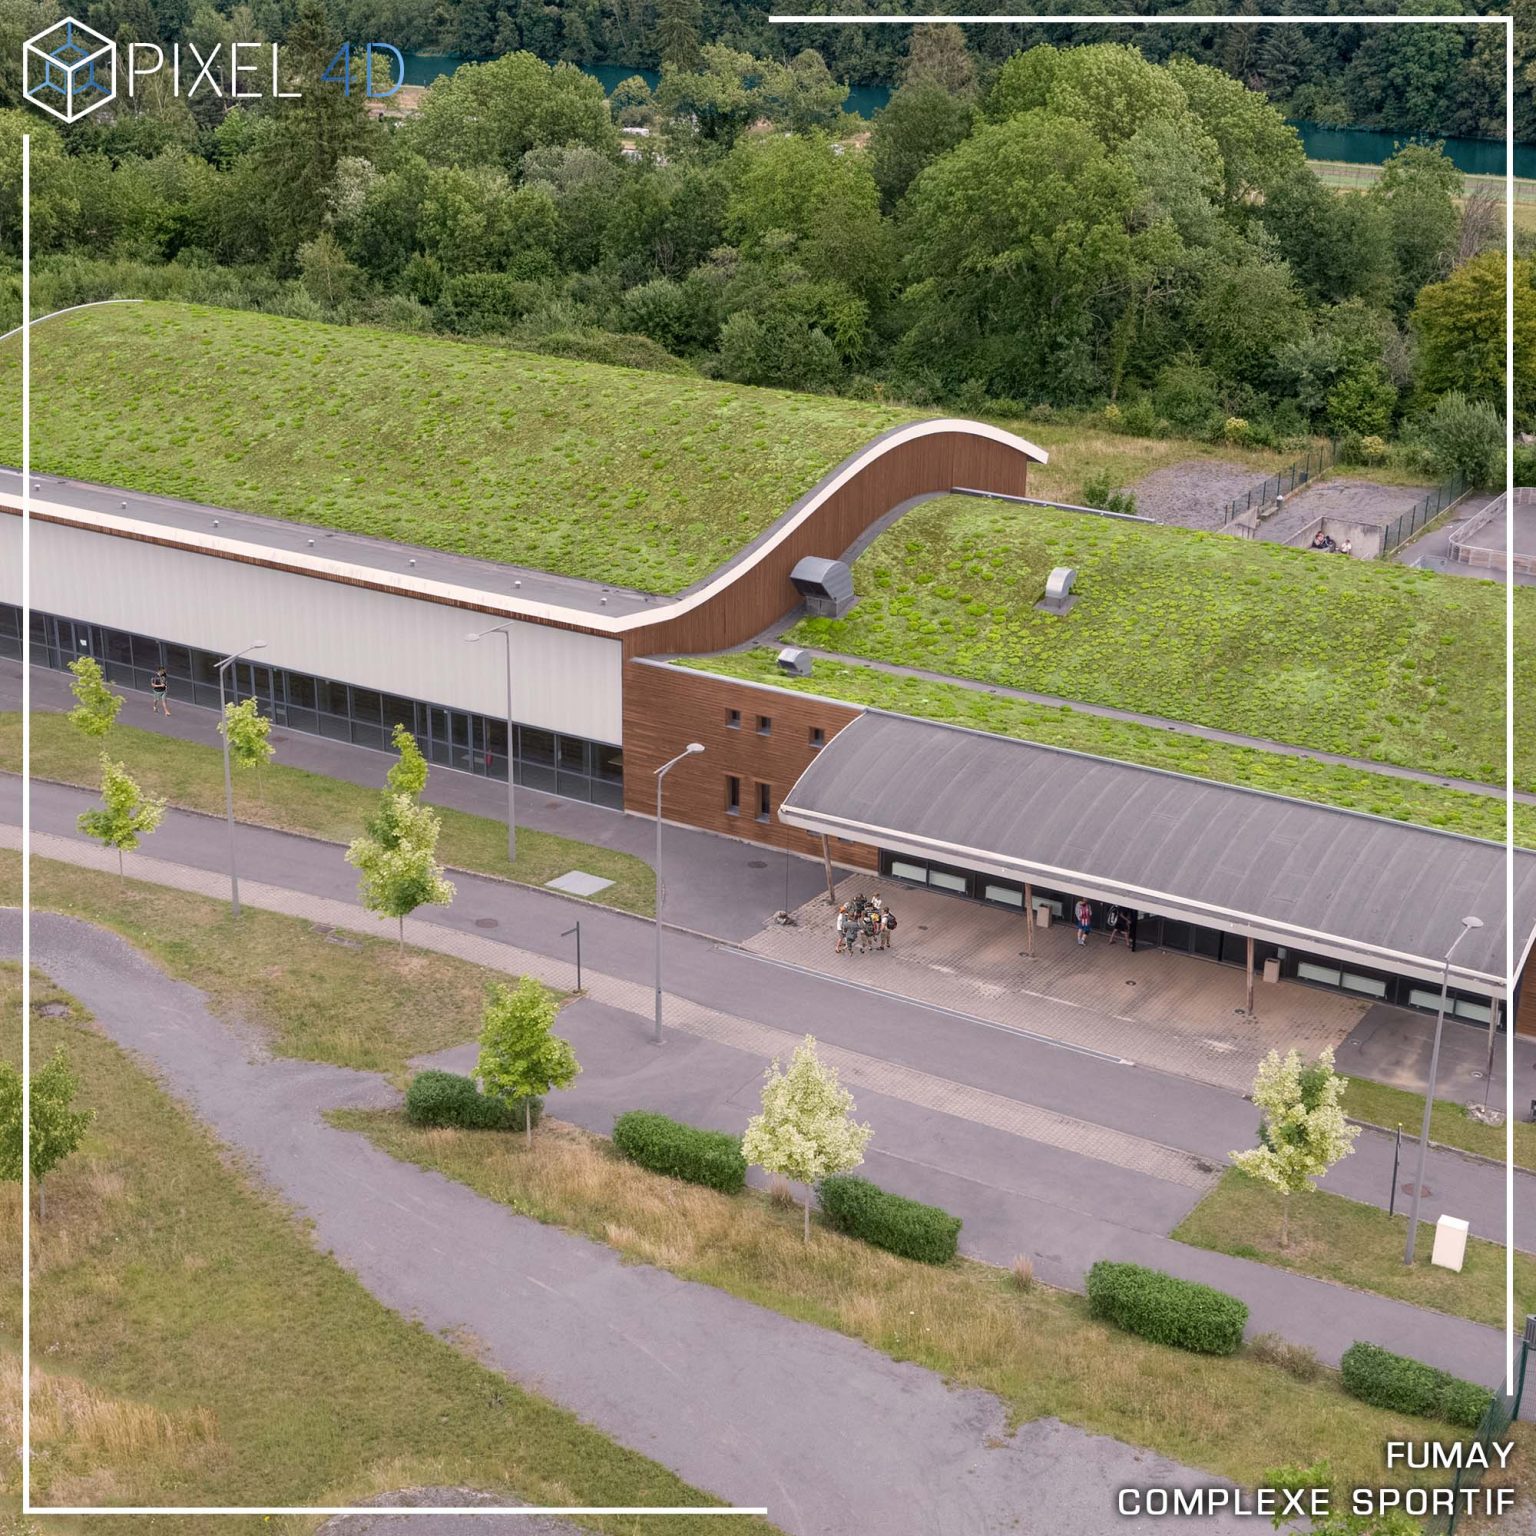 COMPLEXE-SPORTIF-FUMAY-ARDENNES-GRAND-EST-DRONE-VUE-AERIENNE-ZOOM-ARCHITECTURE-COPYRIGHT-PIXEL-4D